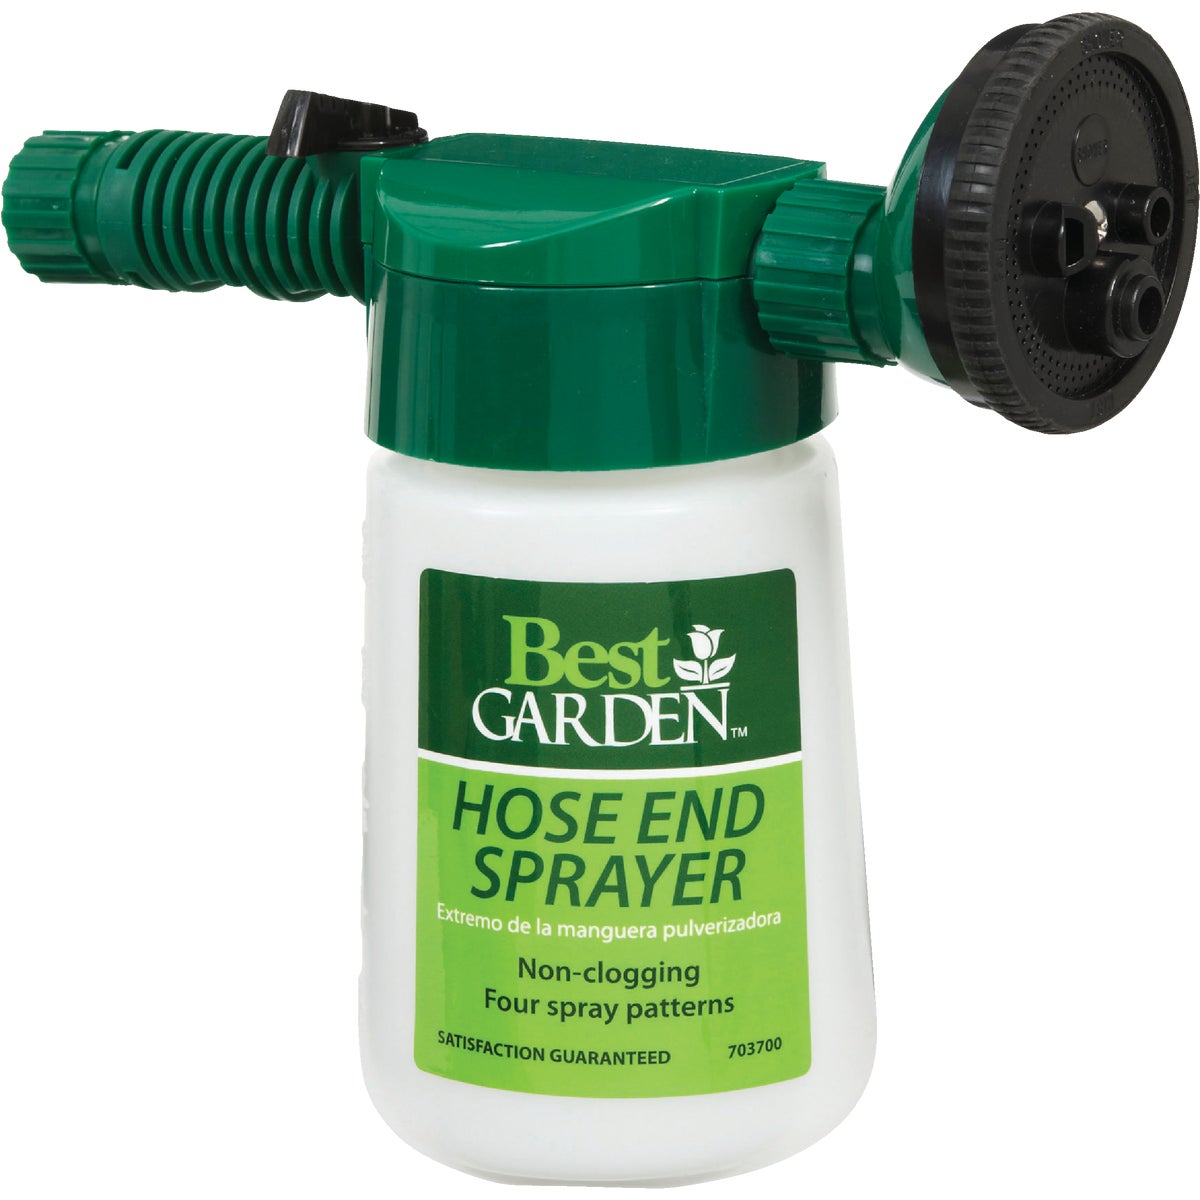 Item 703700, Dry hose end sprayer is for dry, water-soluble fertilizers.